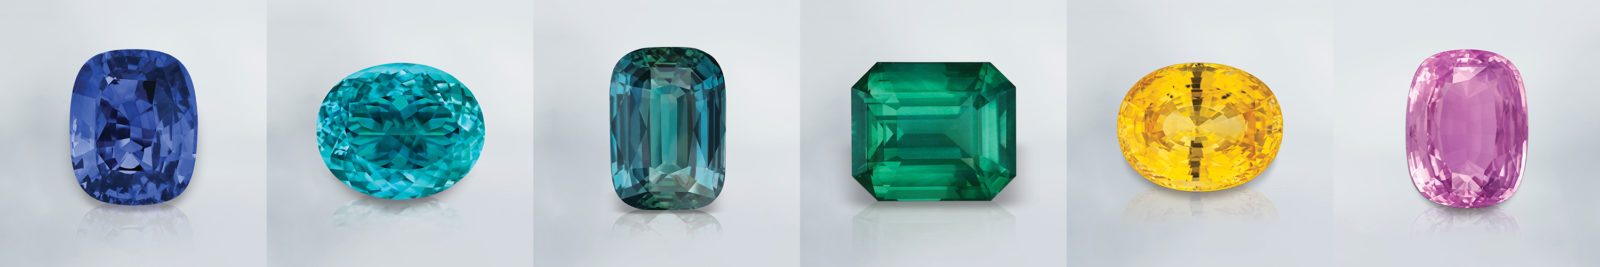 From Left to Right: Pride of Sri Lanka / The Healing Blue (186.82 ct deep royal blue Sapphire from Sri Lanka), The Magnificent (106.20 ct, Paraiba blue Tourmaline from Mozambique), The Miracle (100.06 ct teal Sapphire from Tanzania), The Crown of Colombia (241.04 ct deep electric green Emerald from Colombia), The Sunrise of Ceylon (115.13 ct sunshine yellow Sapphire), The Princess Pink (109.82 ct bubble gum pink Sapphire from Sri Lanka)